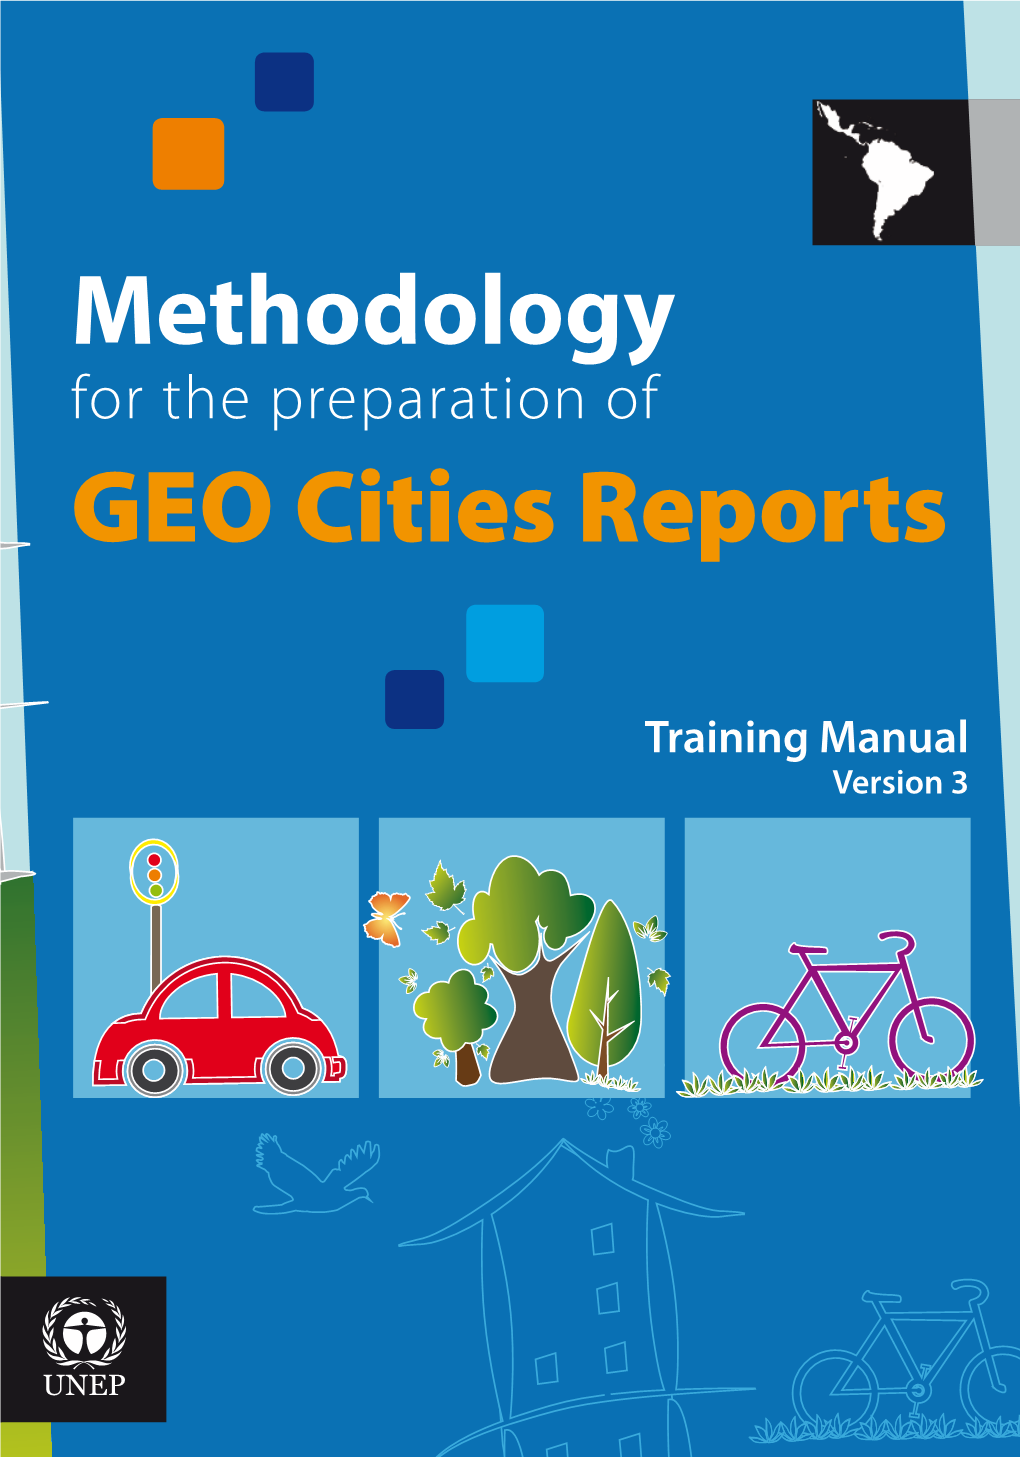 For the Preparation of GEO Cities Reports